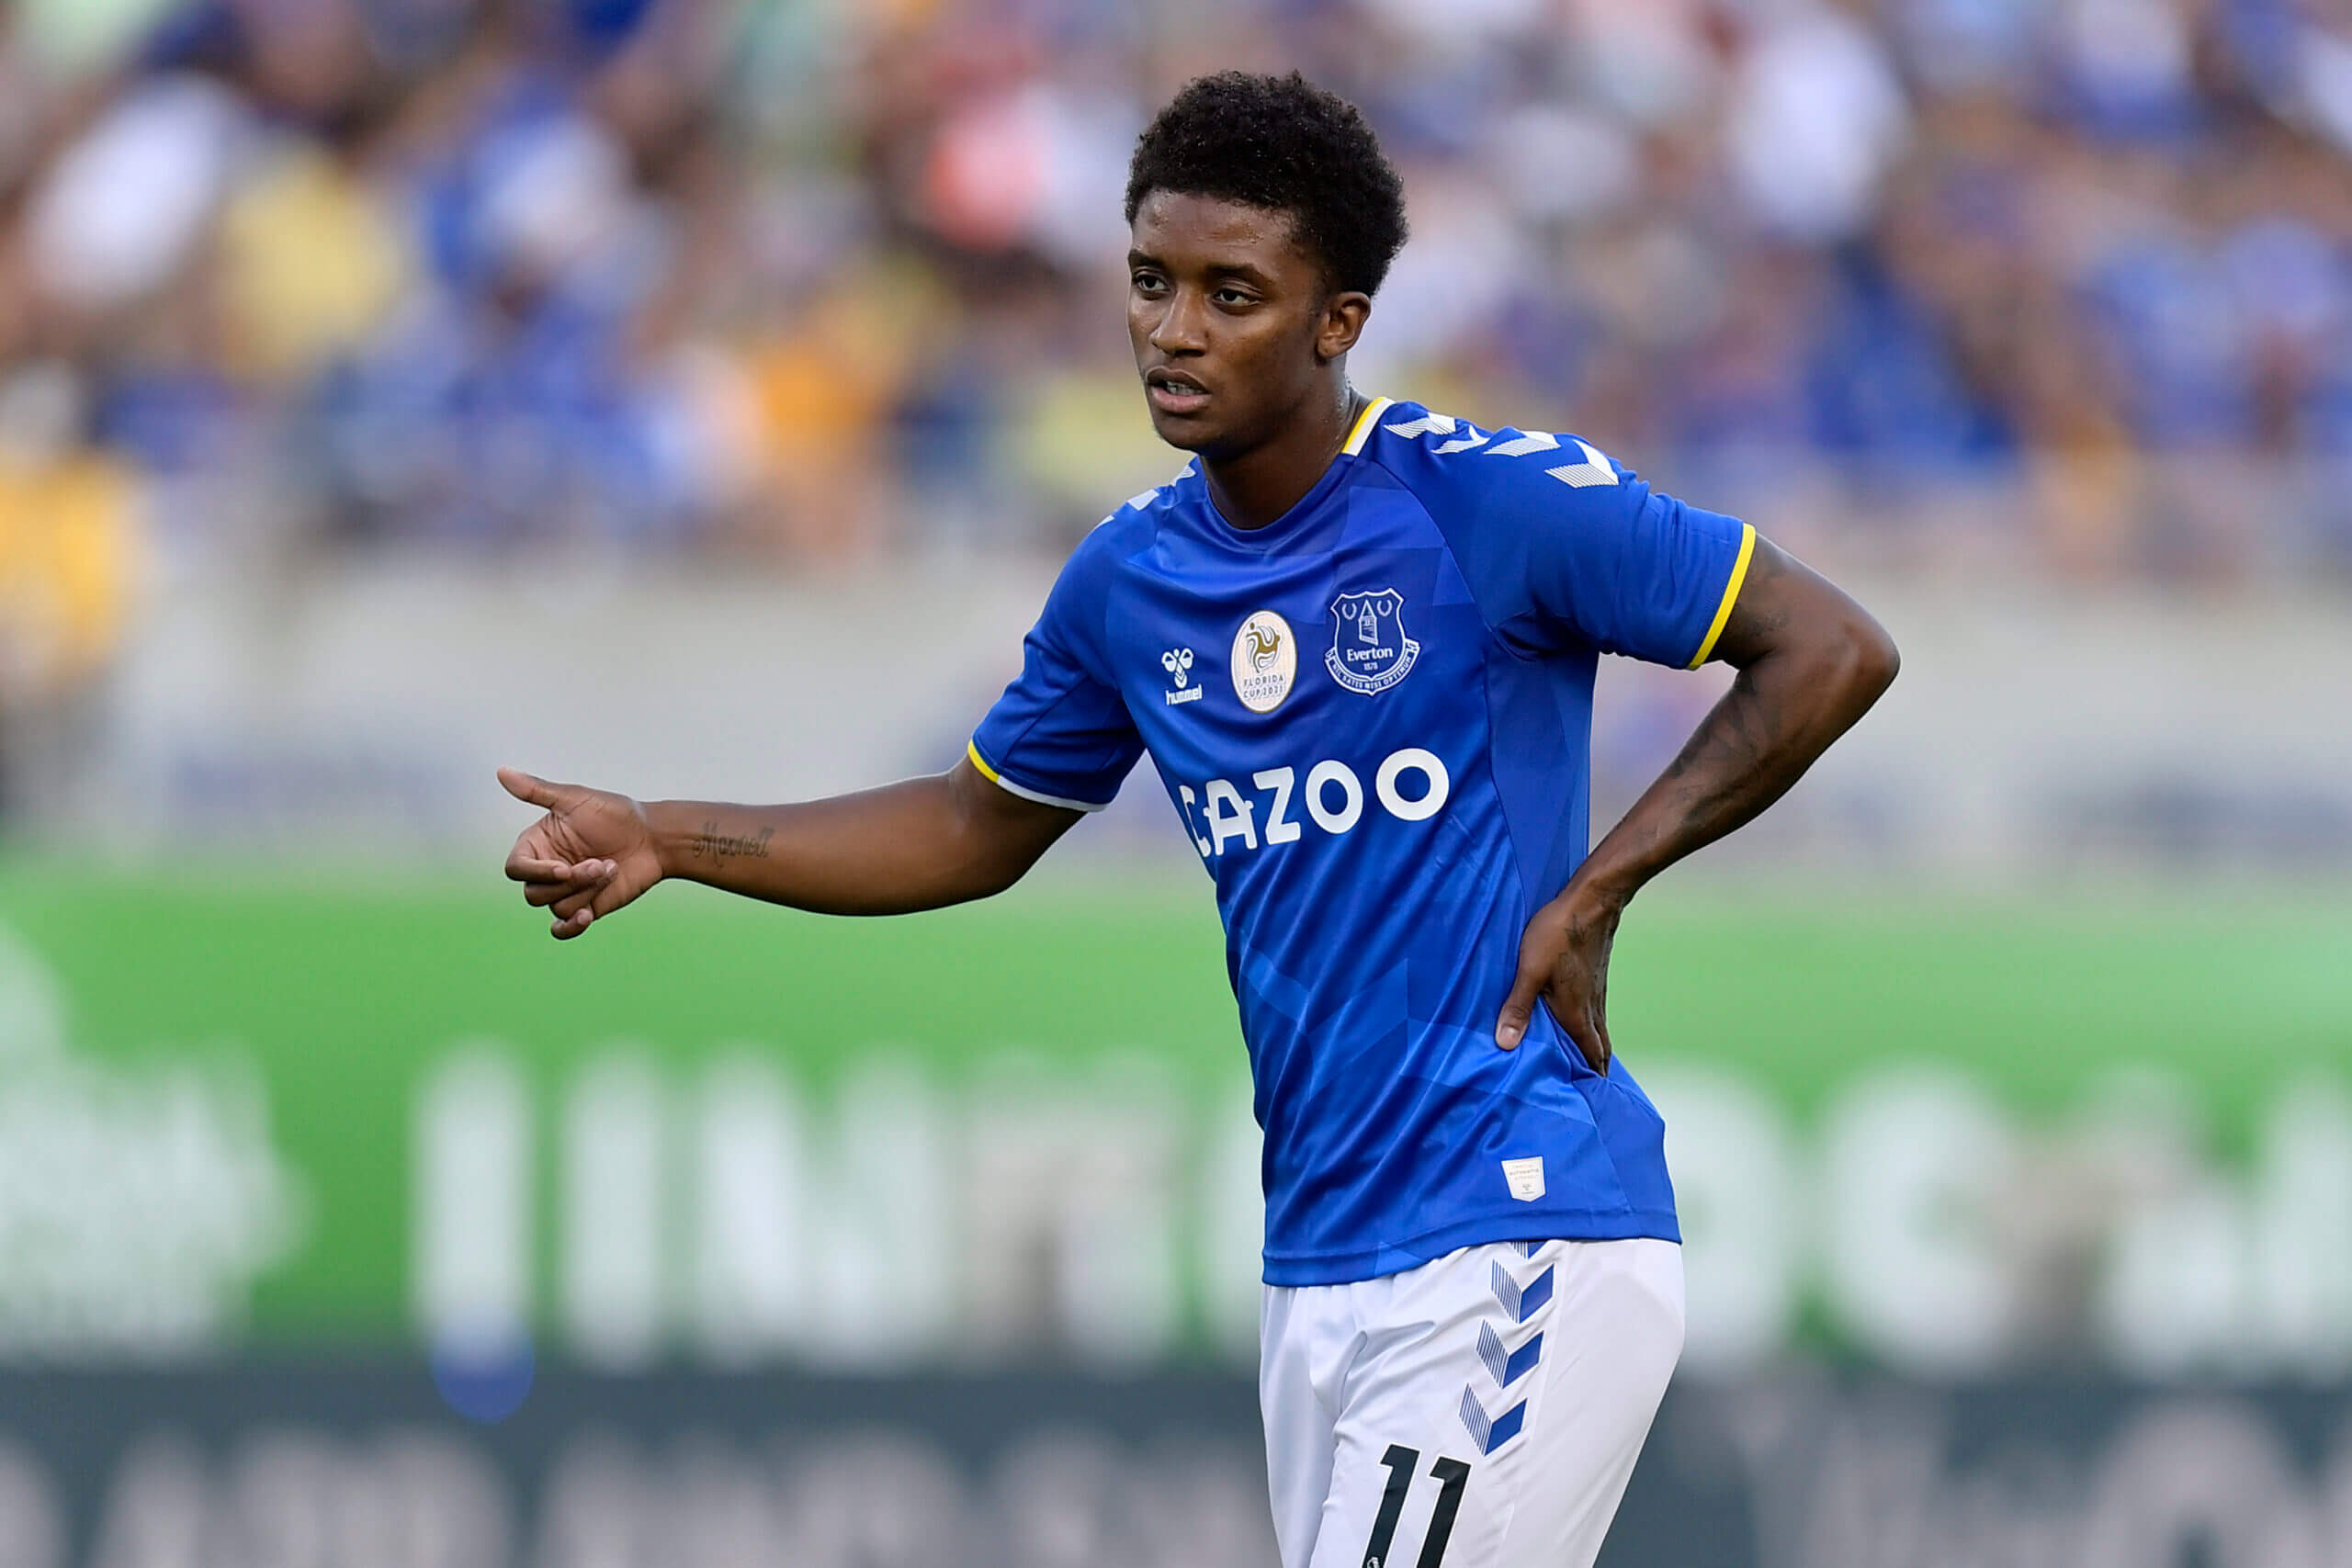 Demarai Gray must find consistency at Everton if he is to finally fulfil potential